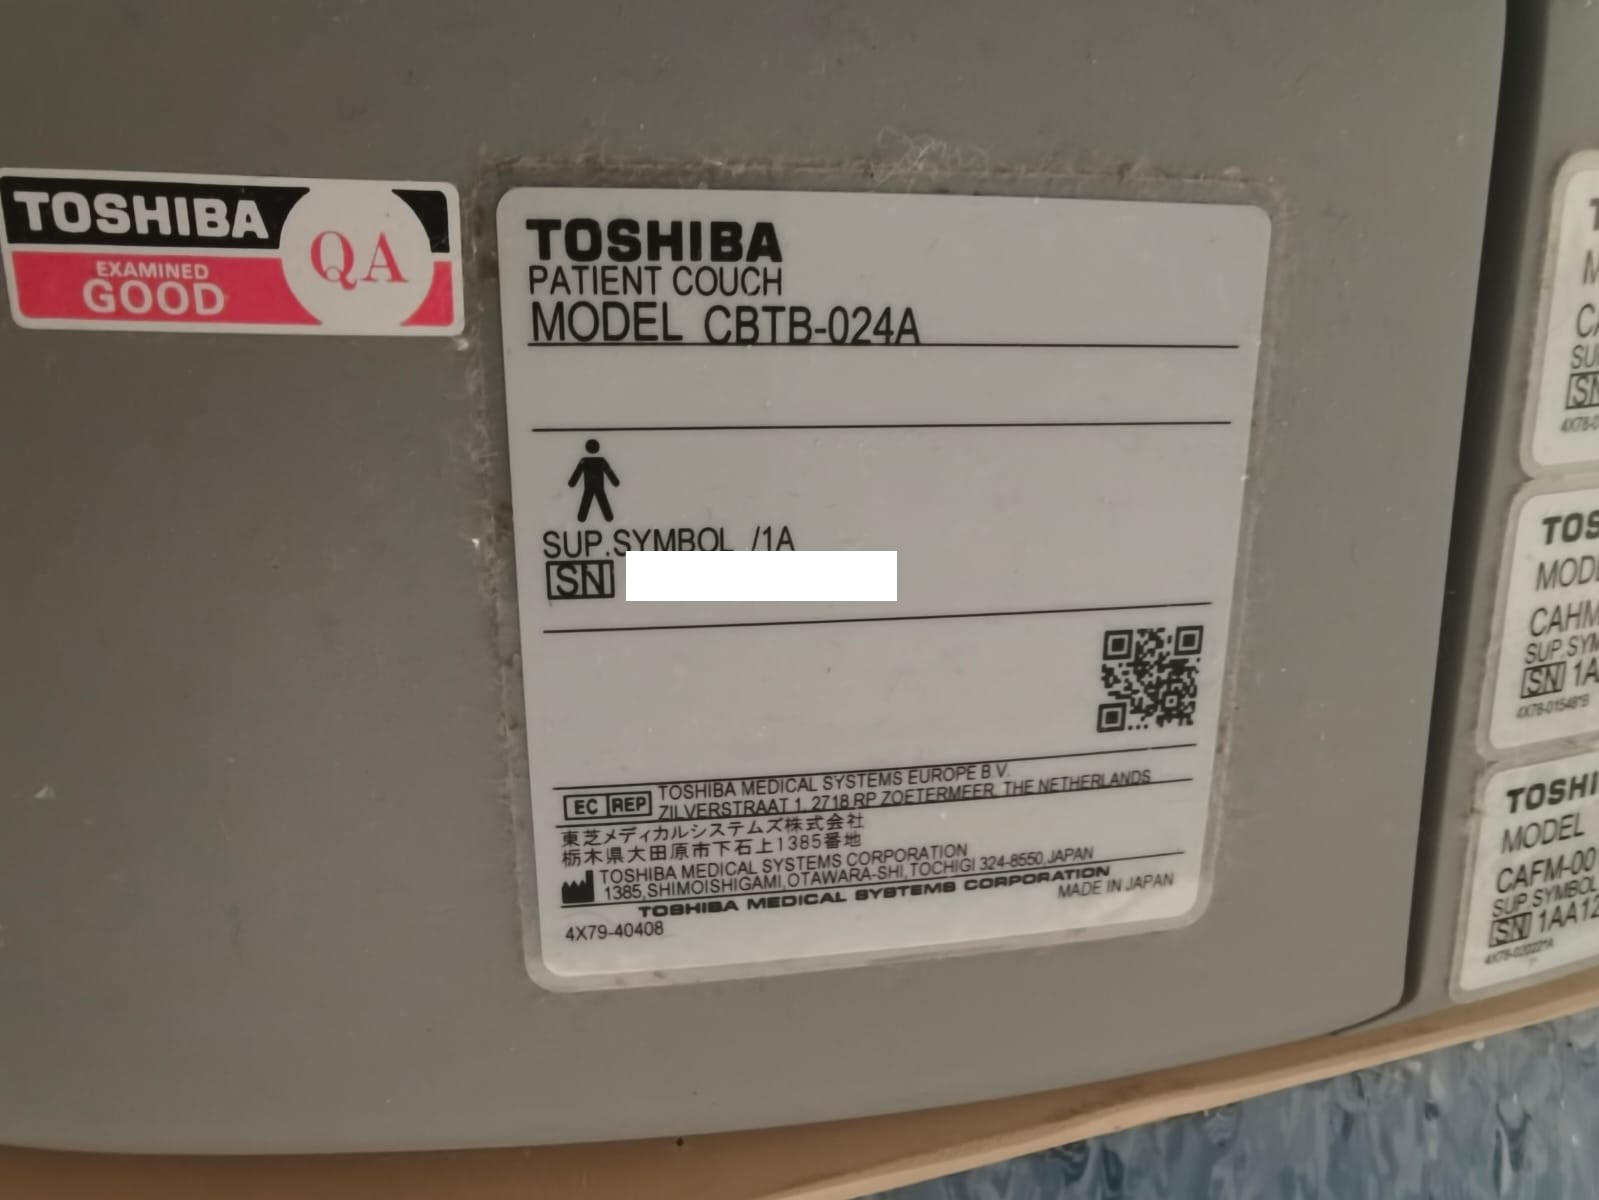 Used Toshiba ALEXION 16 CT Scan for sale (ID 14804363583) | 20Med